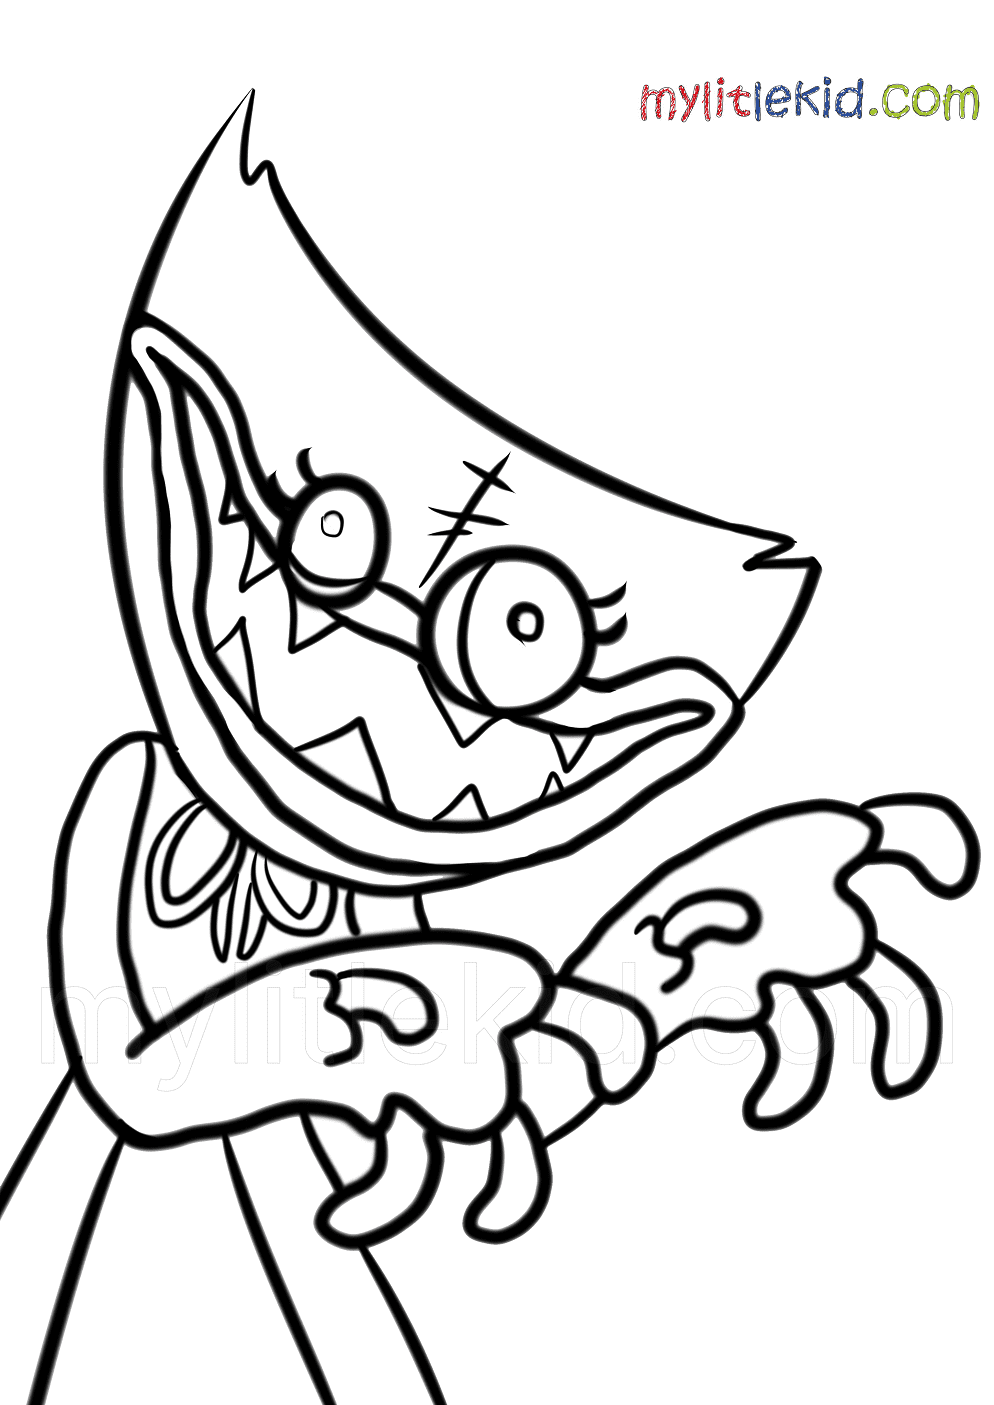 Scary Huggy Wuggy Coloring Pages